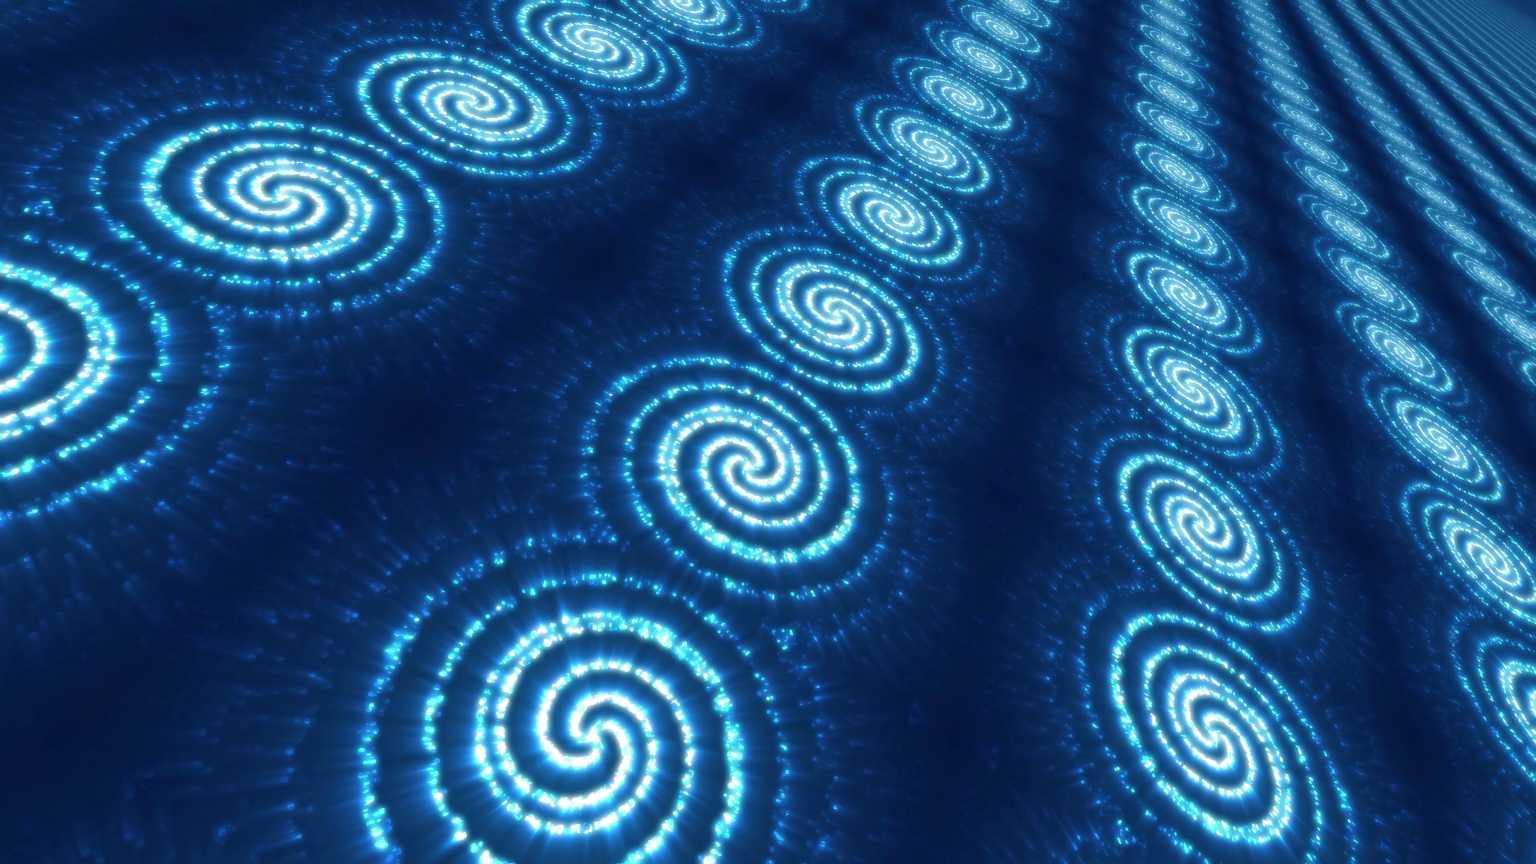 4K Glowing Spirals Looped Screensaver || Free To Use UHD Motion Background || FREE DOWNLOAD